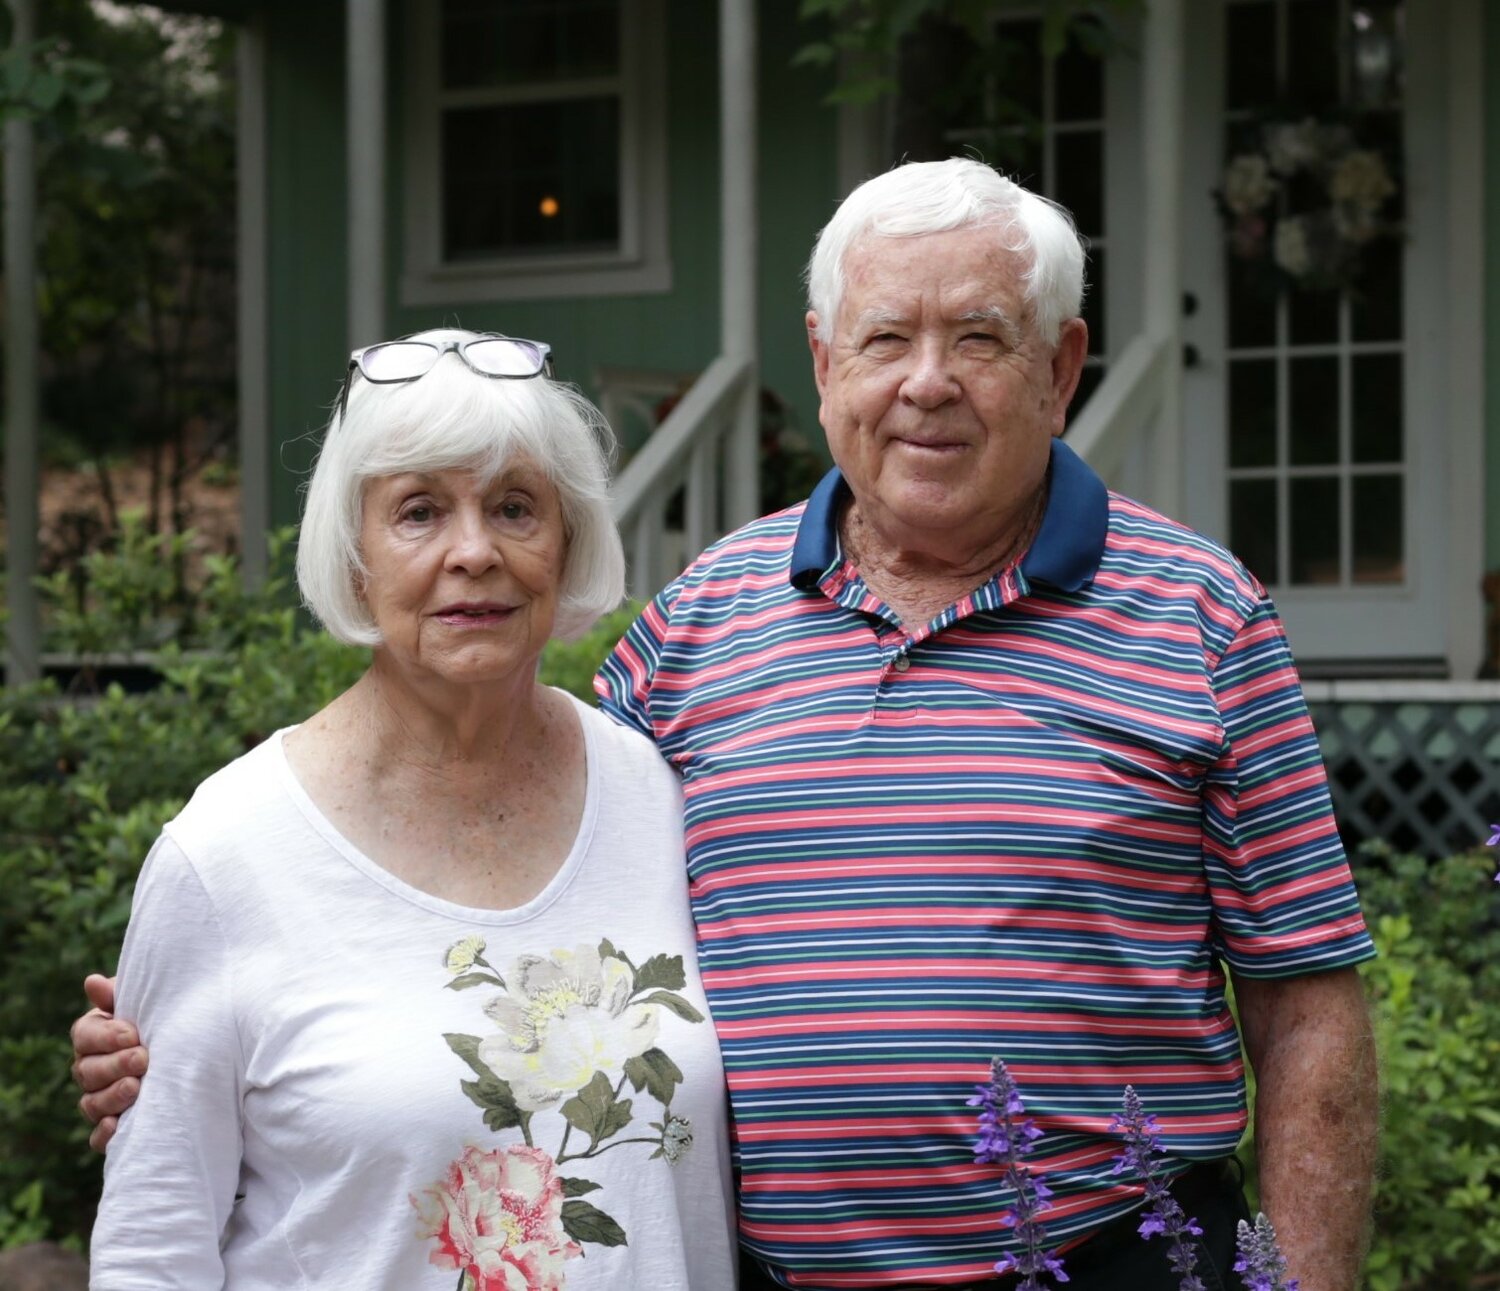 Sylvia and Elroy Doggett at their home on the garden tour Saturday in Mineola.